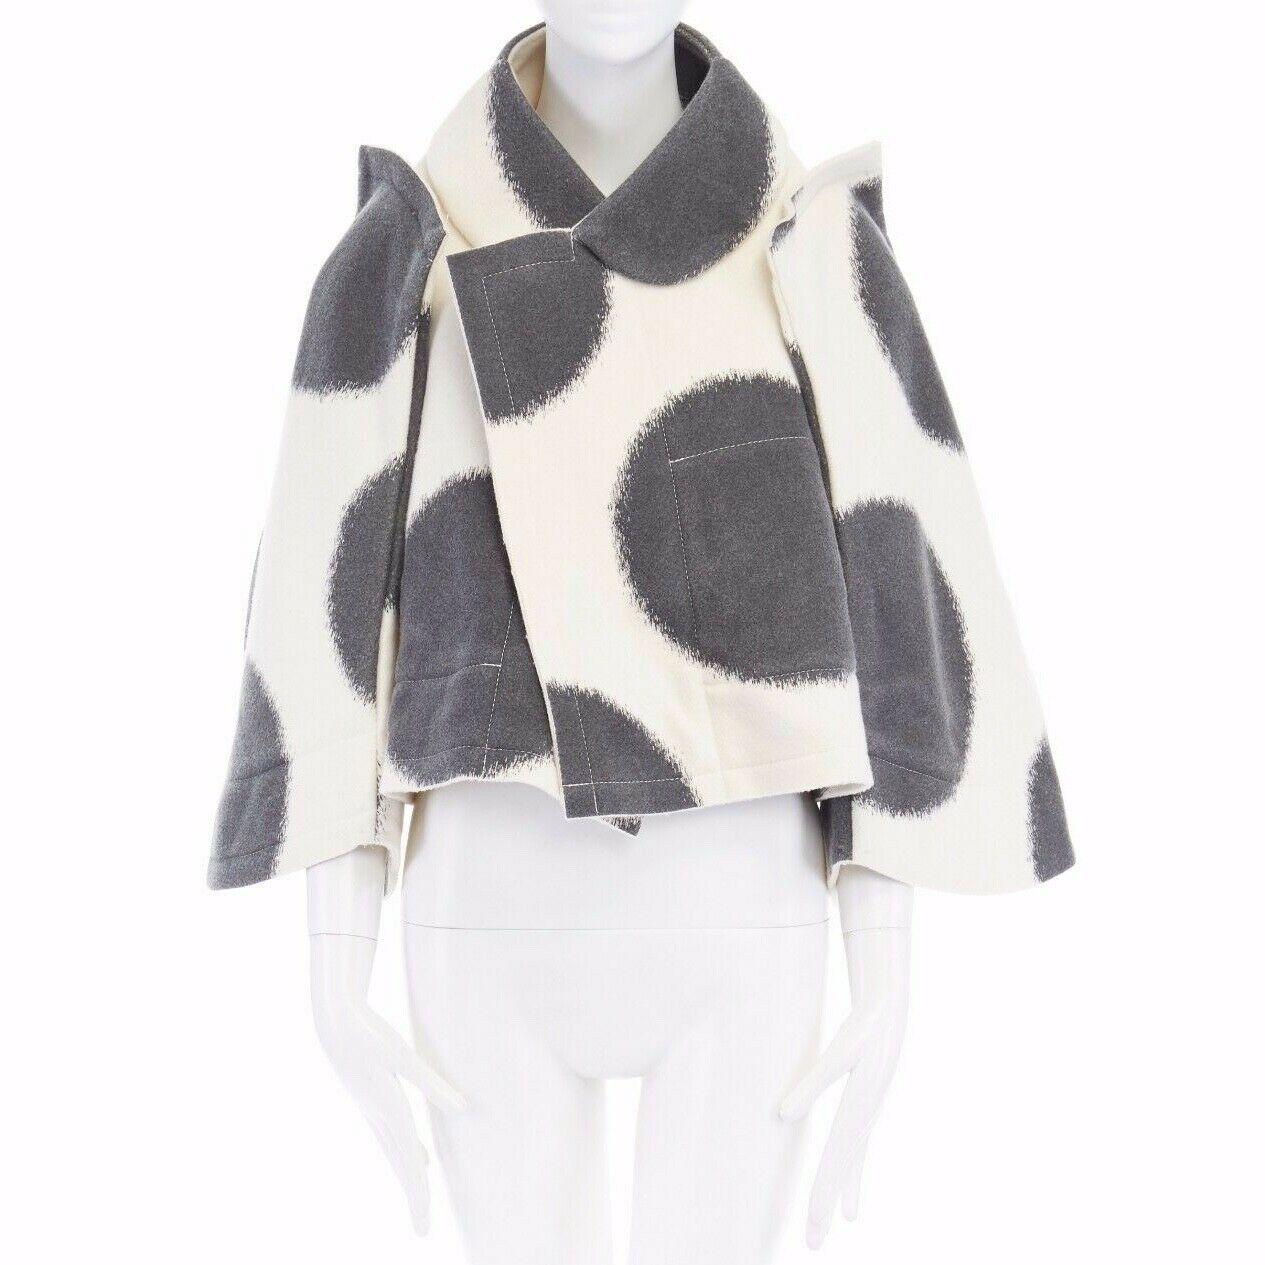 COMME DES GARCONS 
FROM THE FALL WINTER 2012 COLLECTION
Nylon, cotton, wool • Cream base with black large polka dots • Flat packed design • Stiff structured wool-felt • Rounded collar • Curved structured sleeves • Protruding shoulders • White